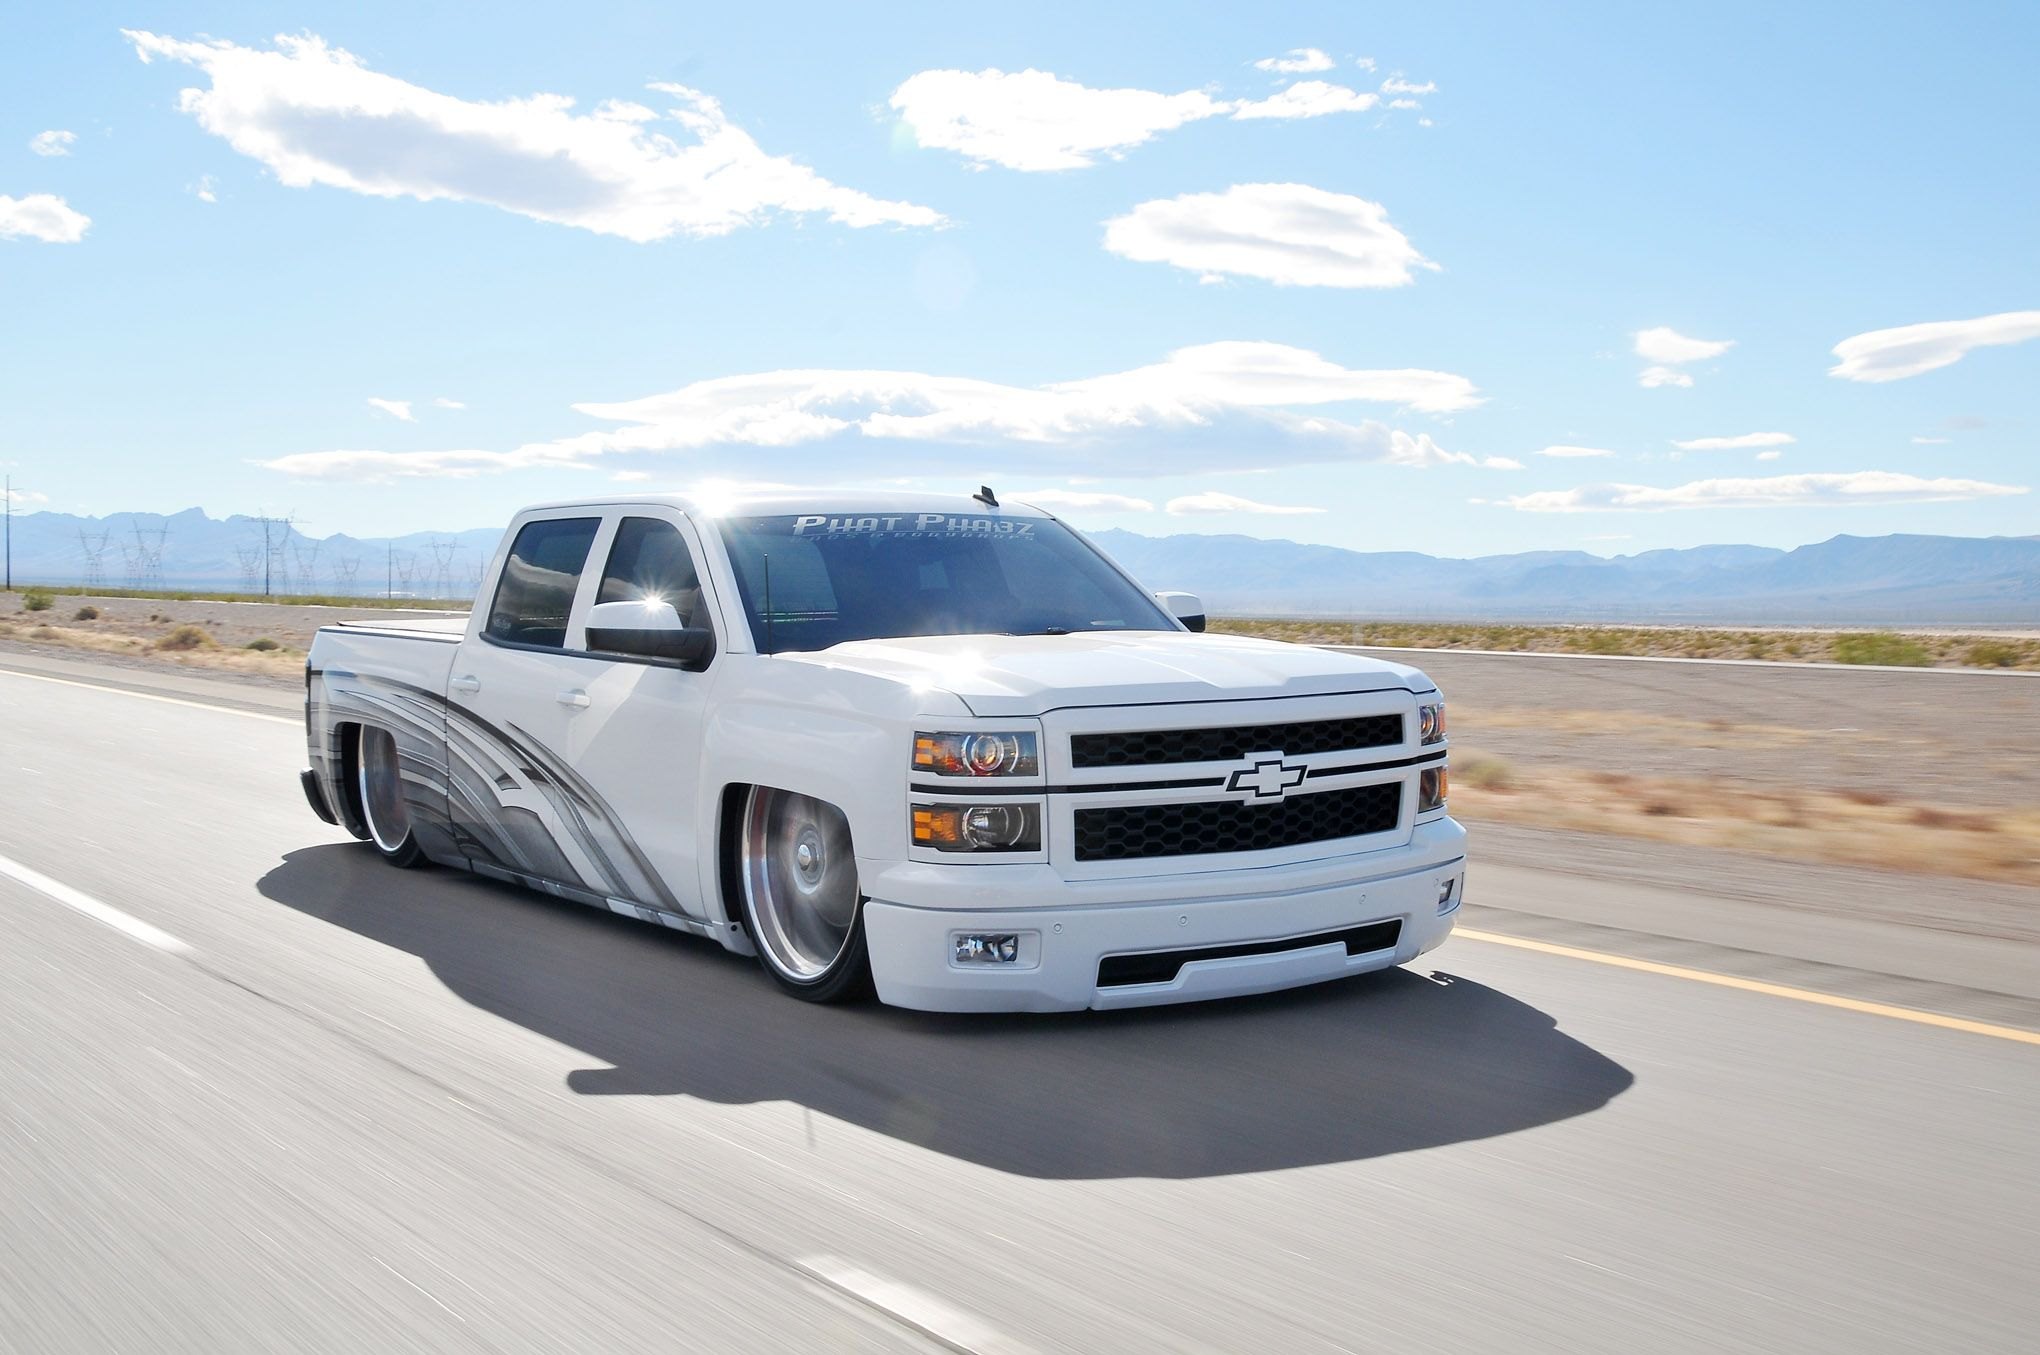 White Lowered Chevy Silverado with Custom Mesh Grille - Photo by Phil Gordon